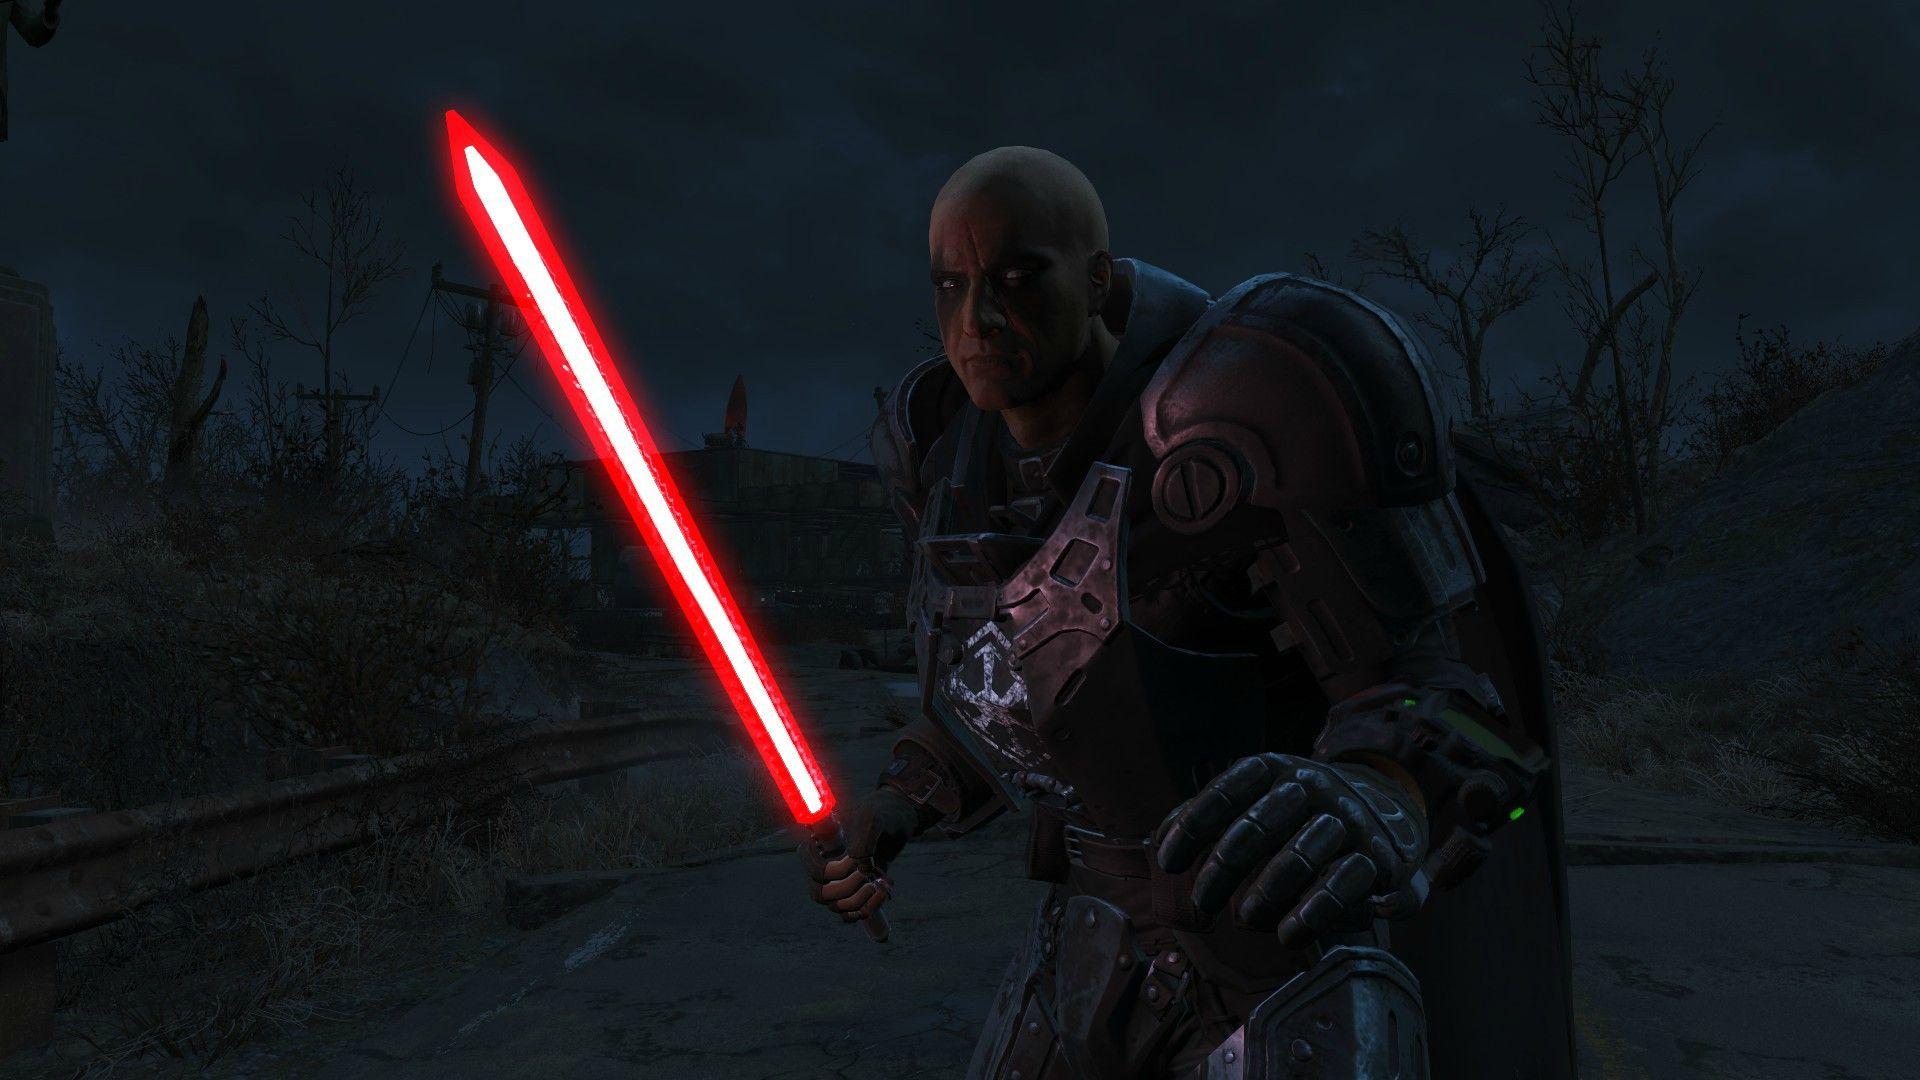 Thanks to mod's I'm a Sith Lord!